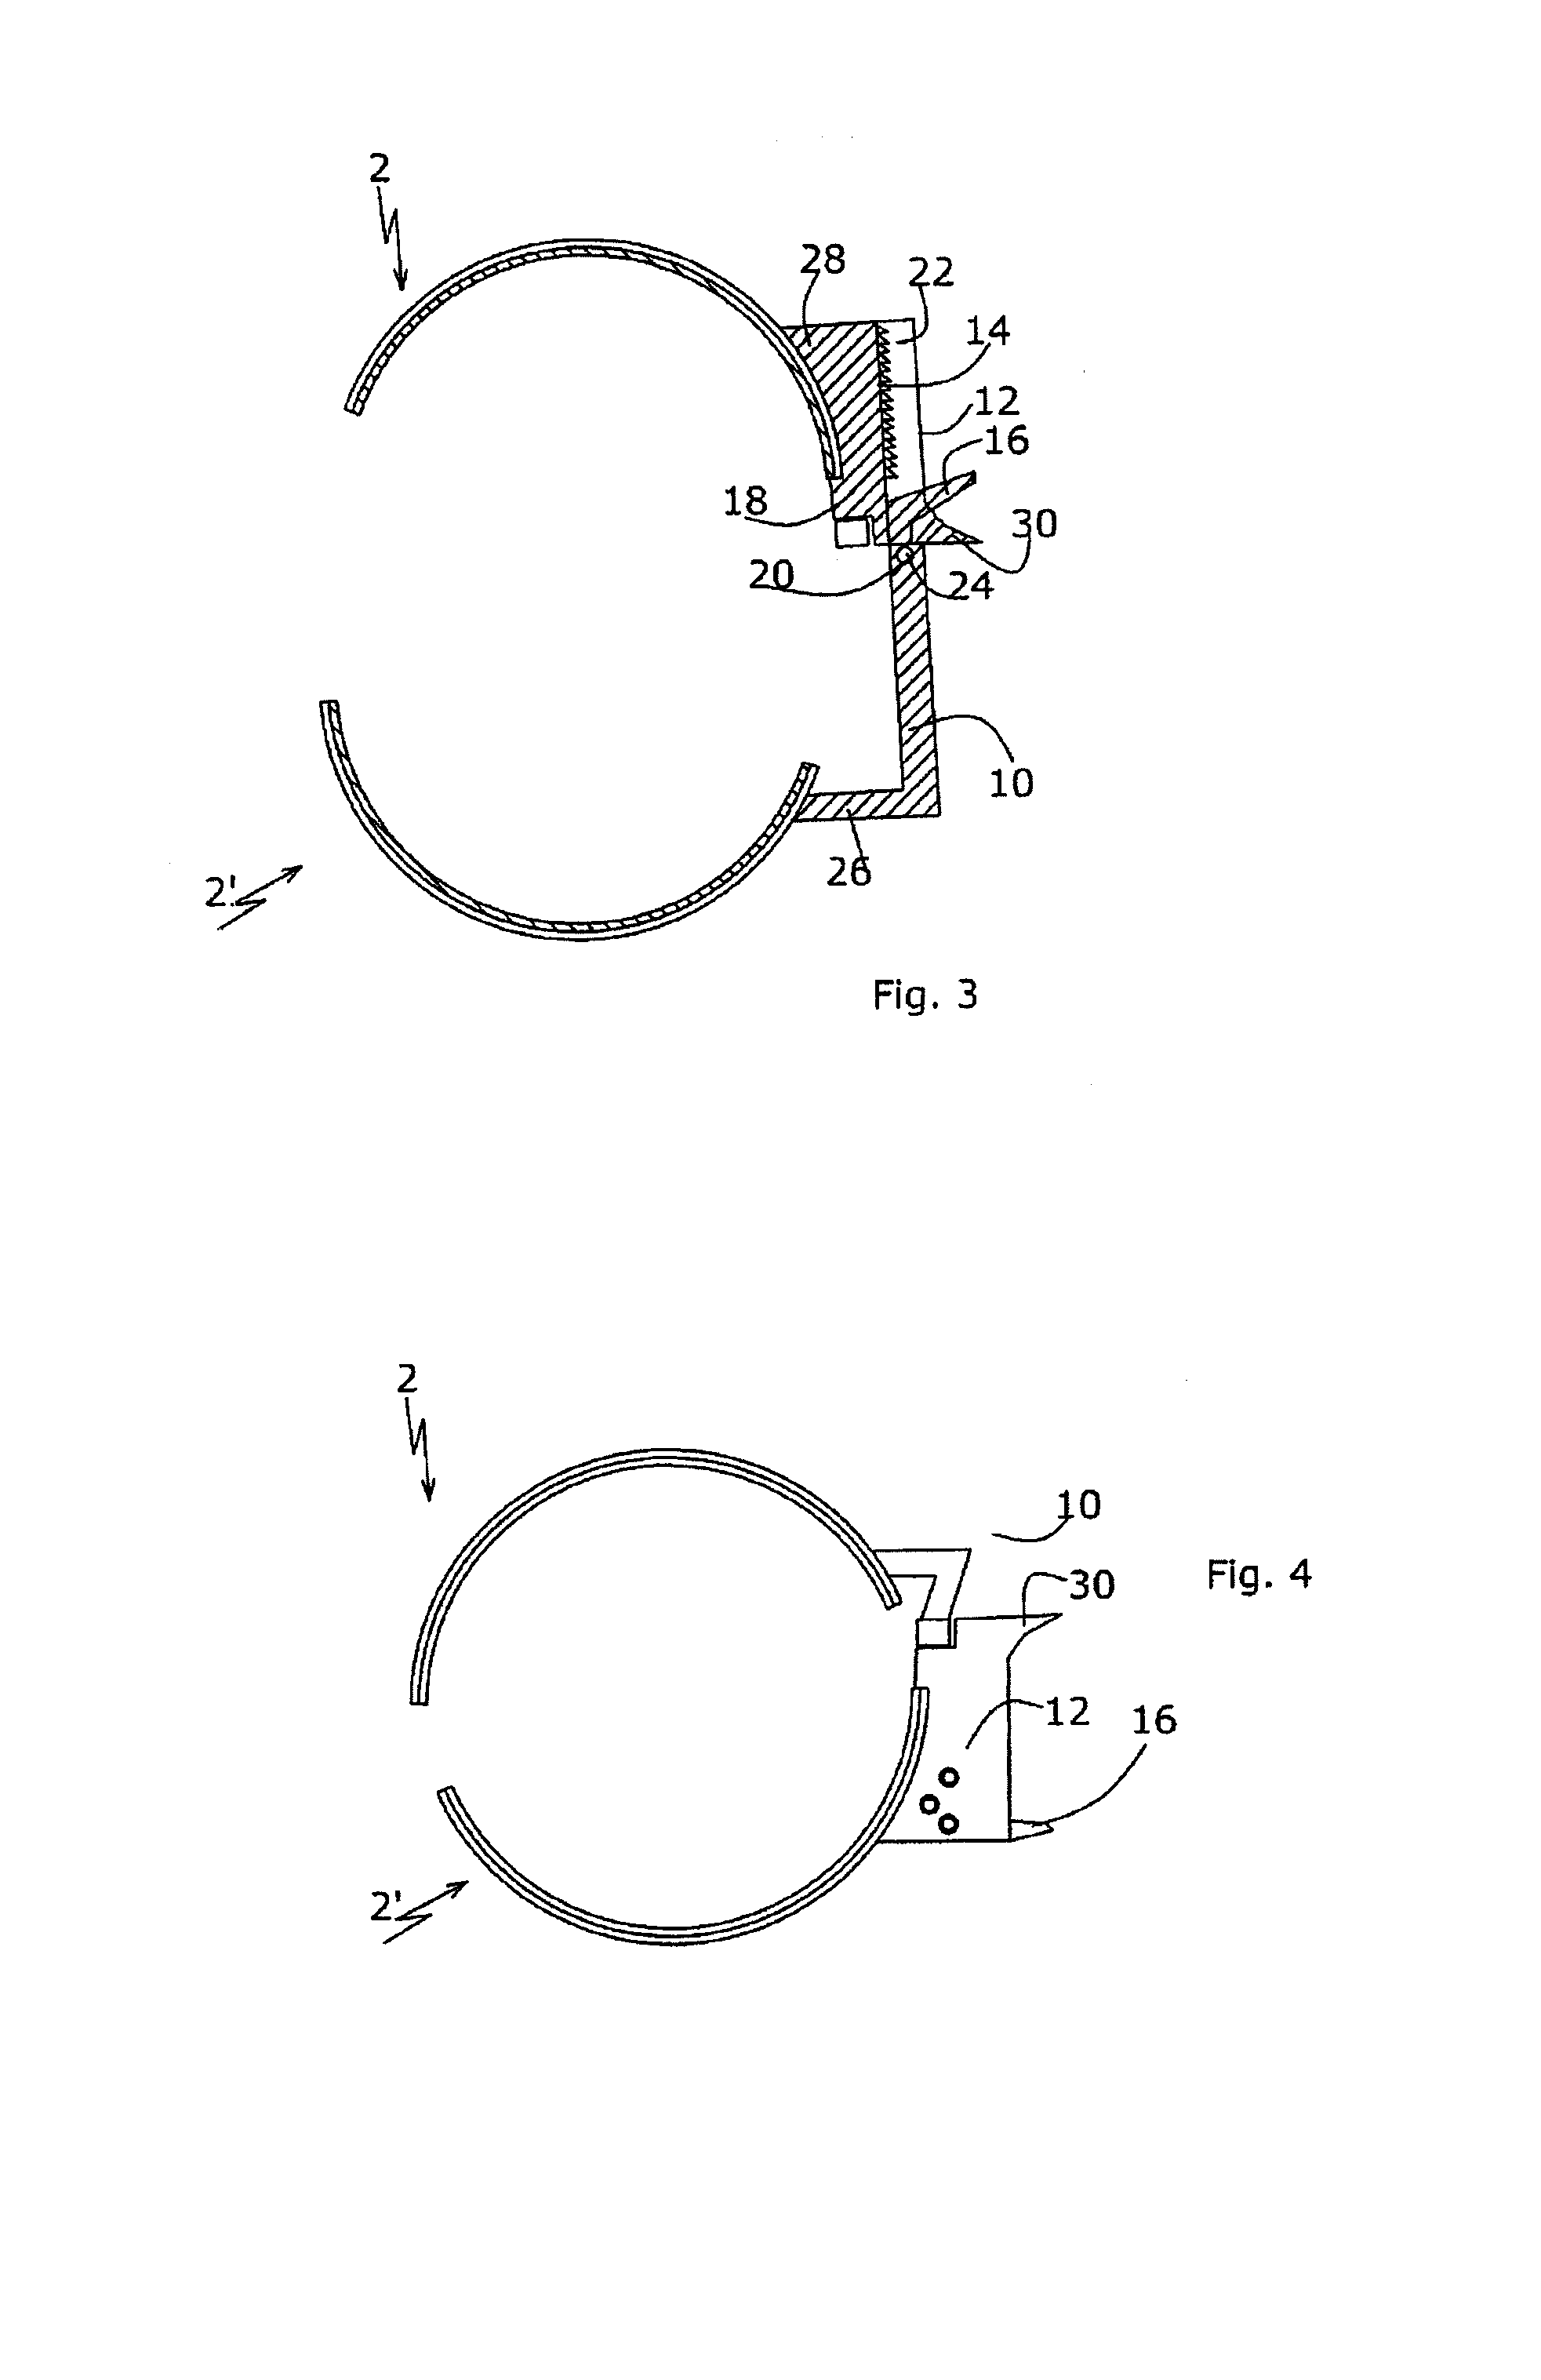 Device for muscle stimulation